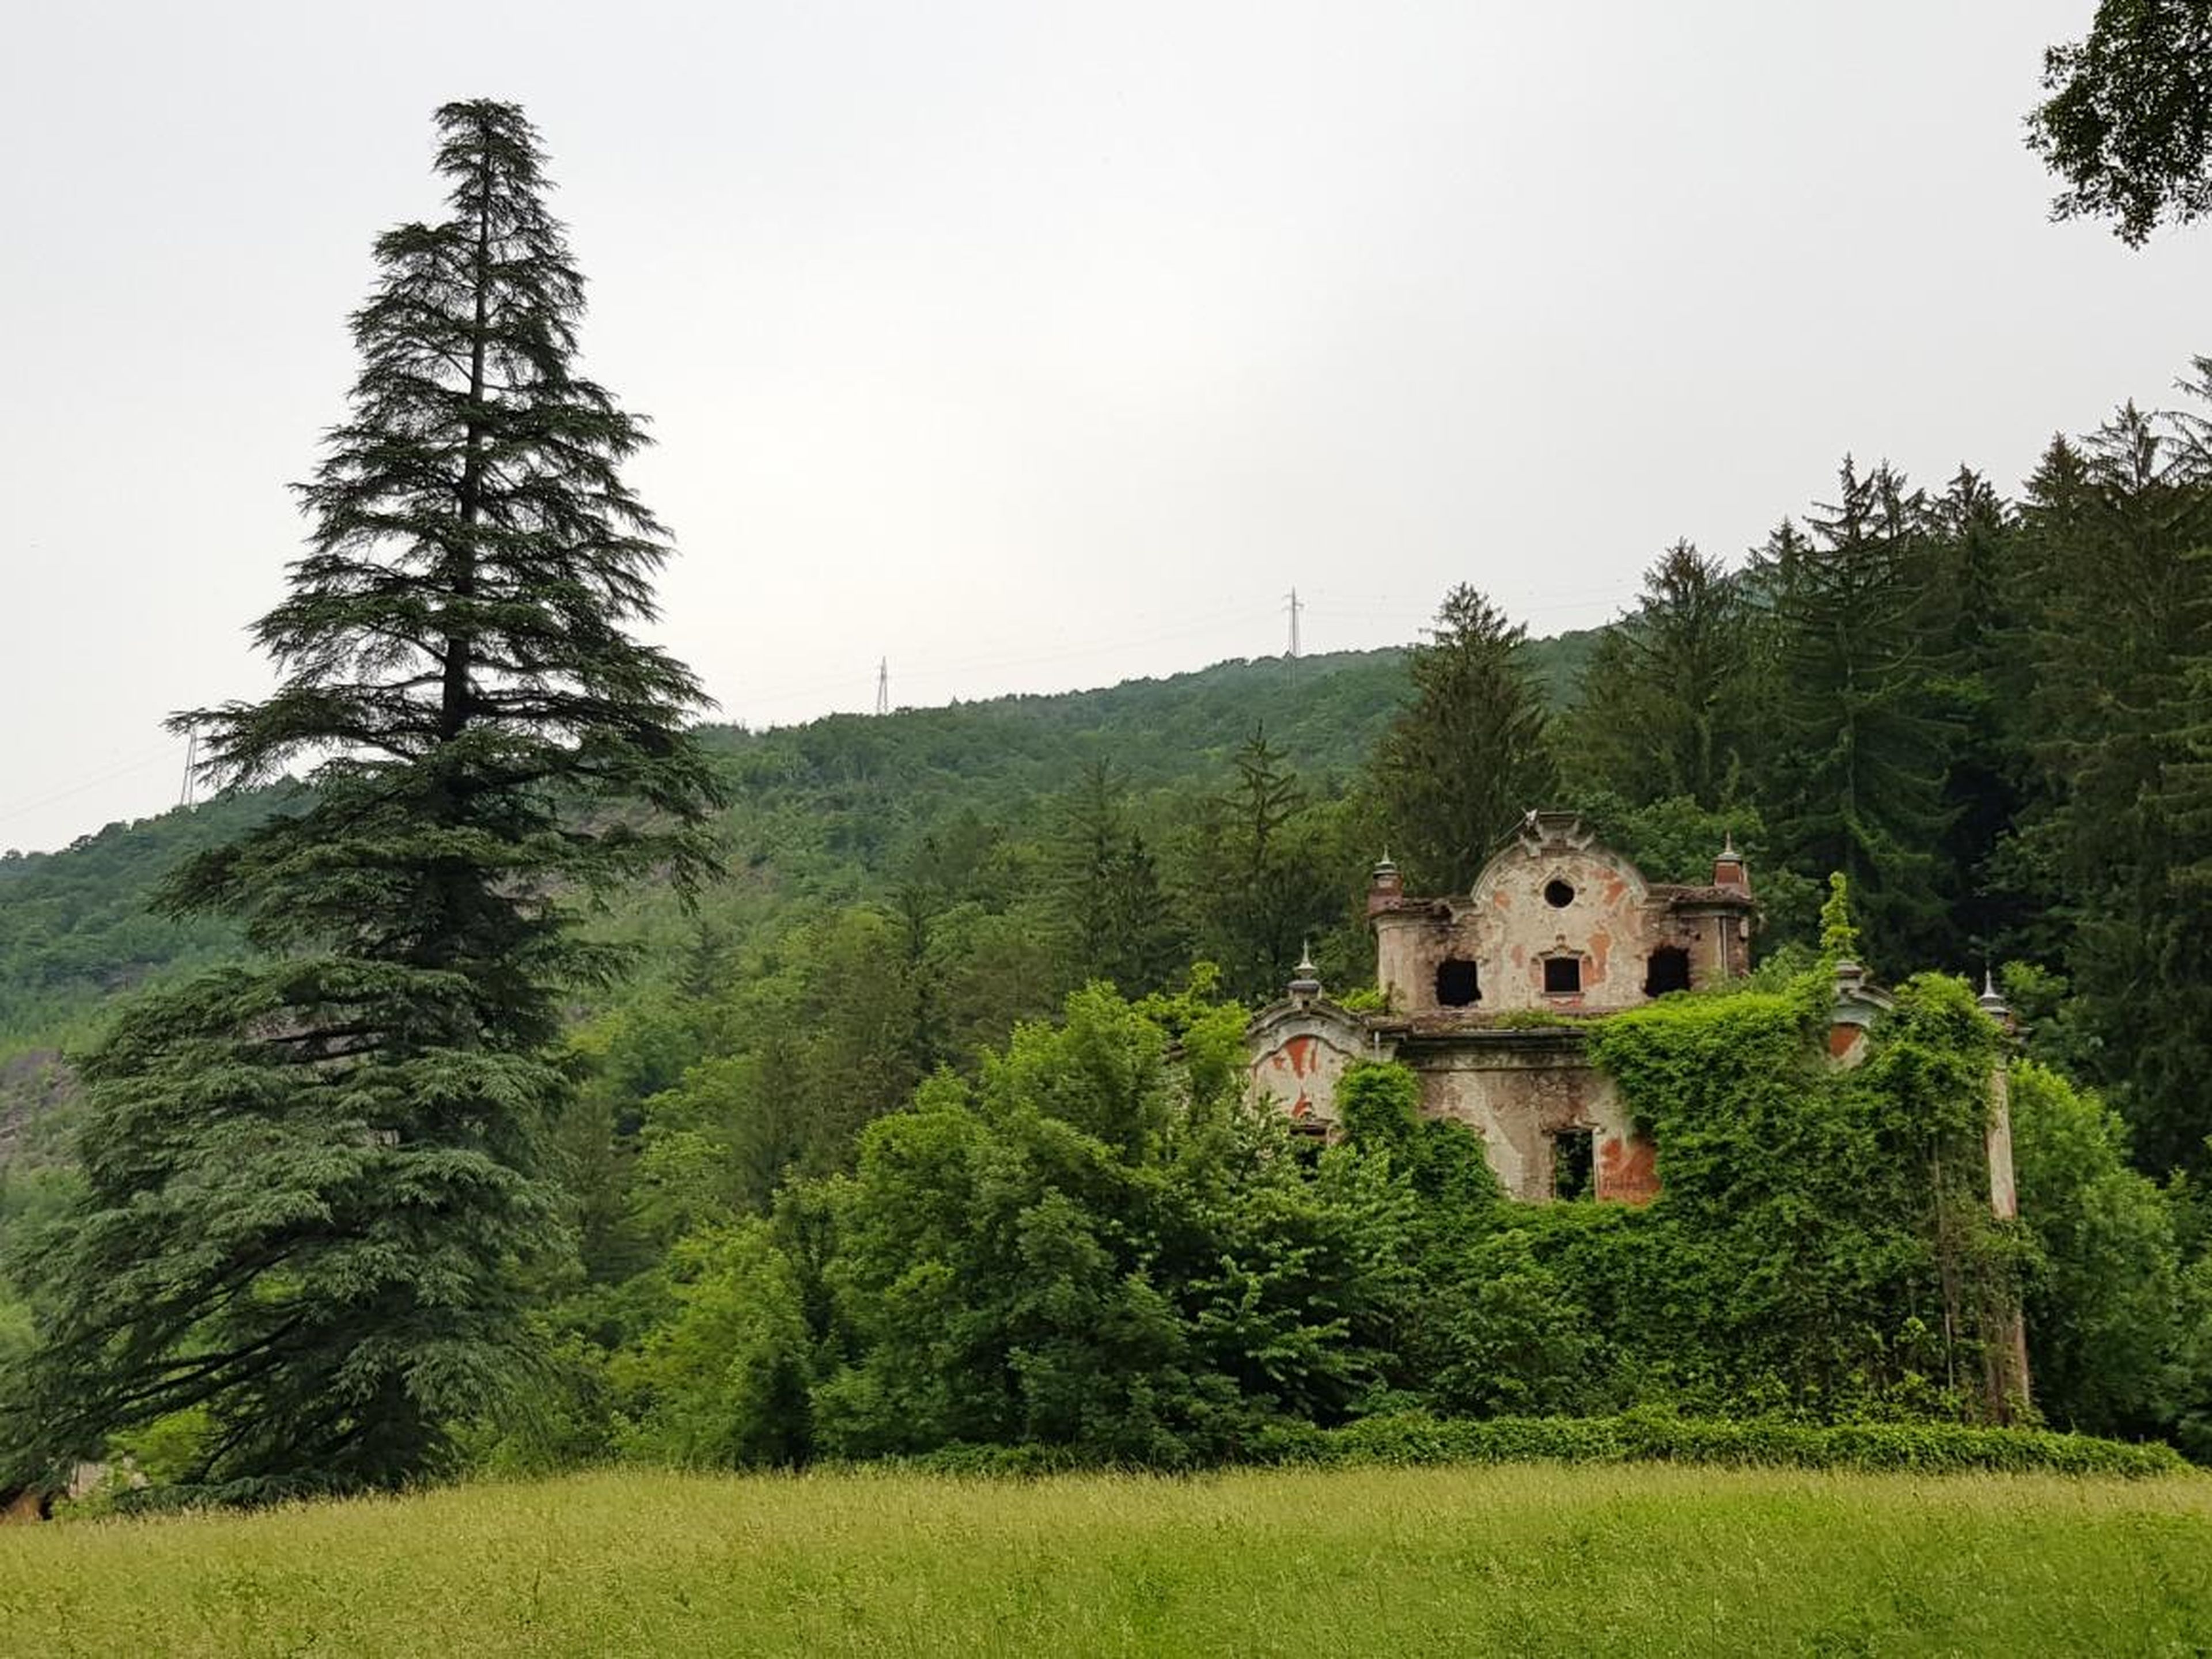 A 2002 avalanche destroyed nearby homes, but the once-lavish and now battered "Ghost Mansion" remains standing.